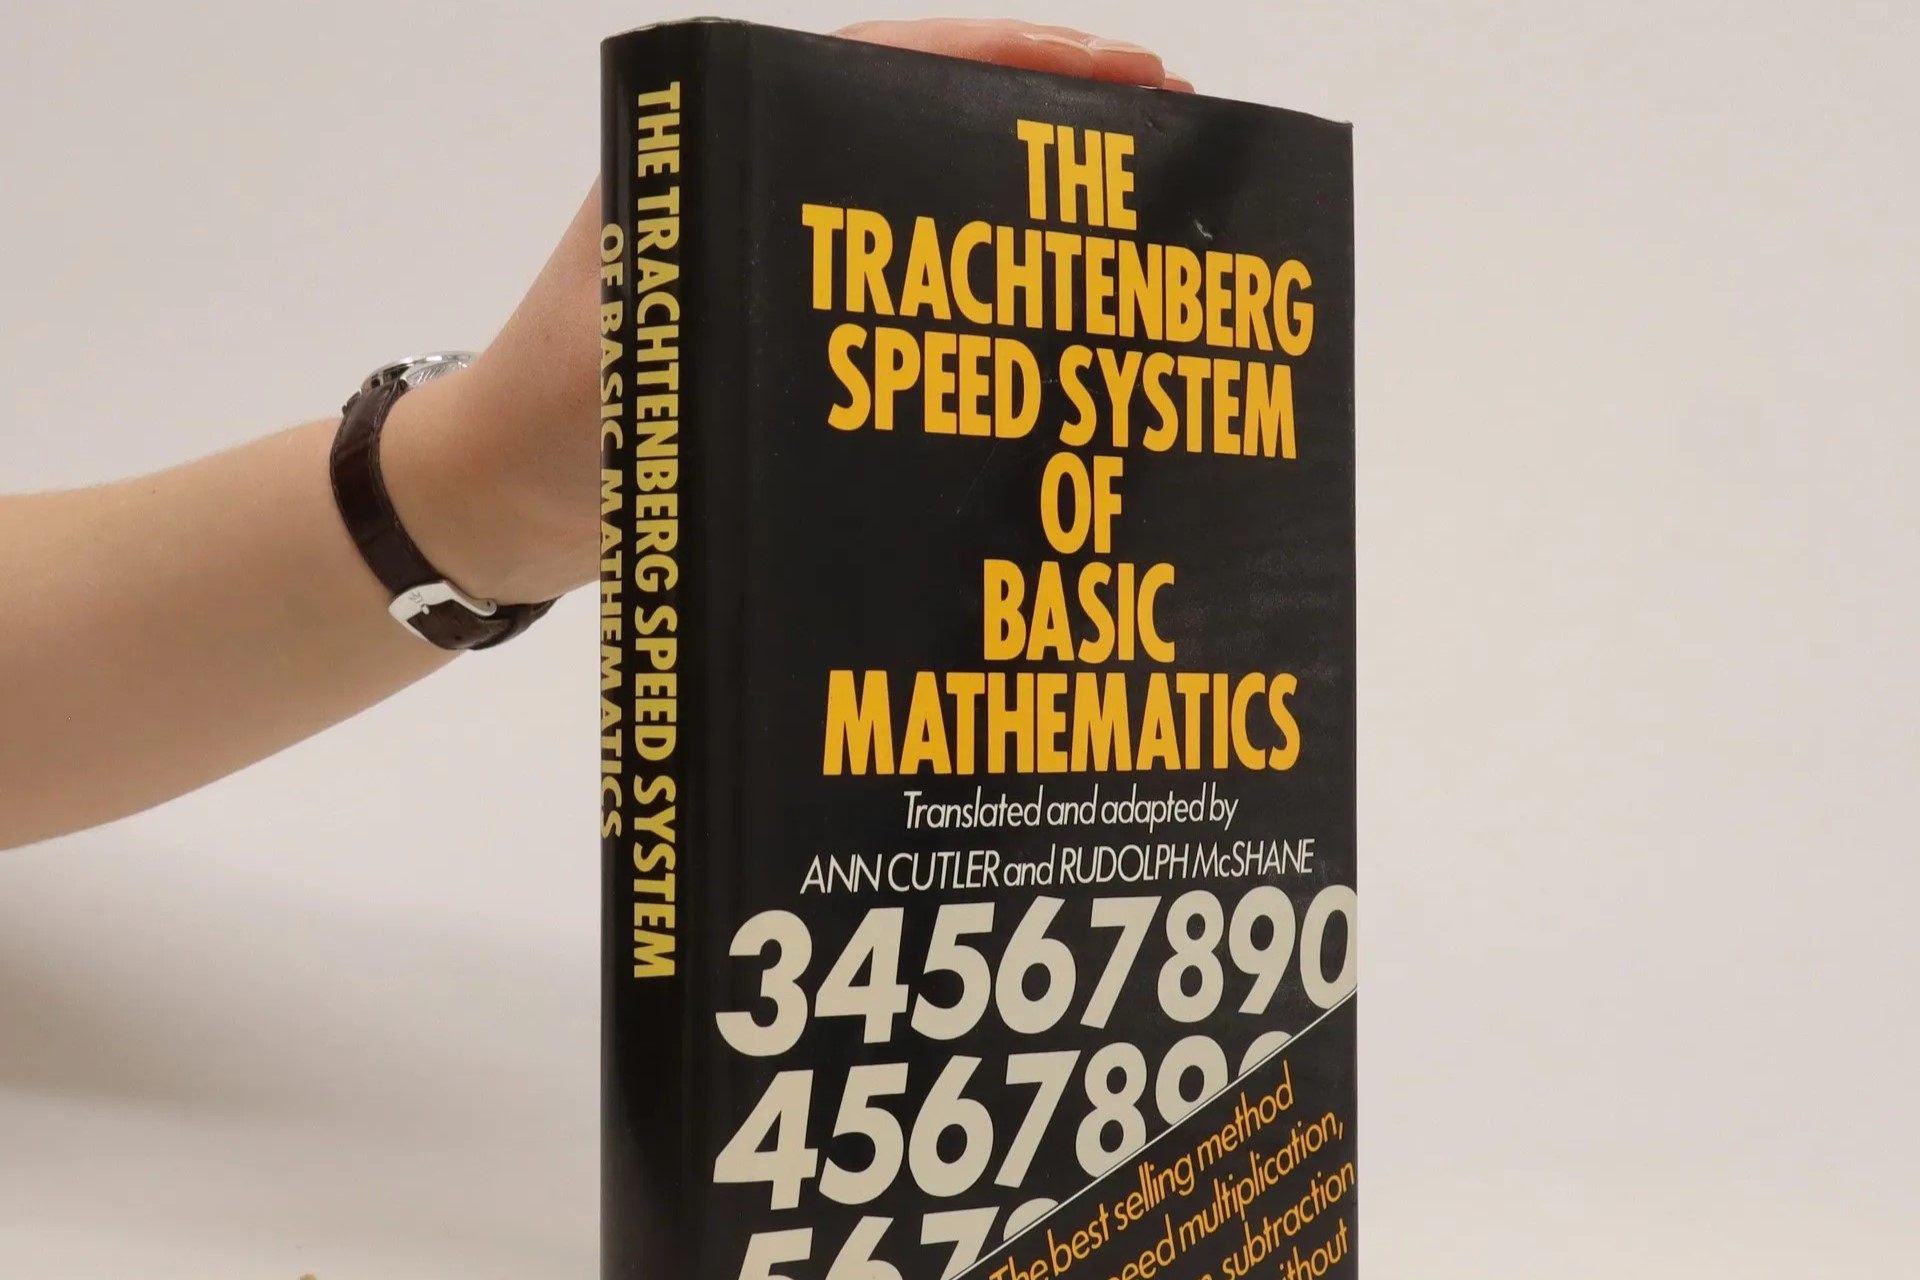 Unleash Your Math Genius With The Trachtenberg System - Boost Your Mental Math Skills Now!